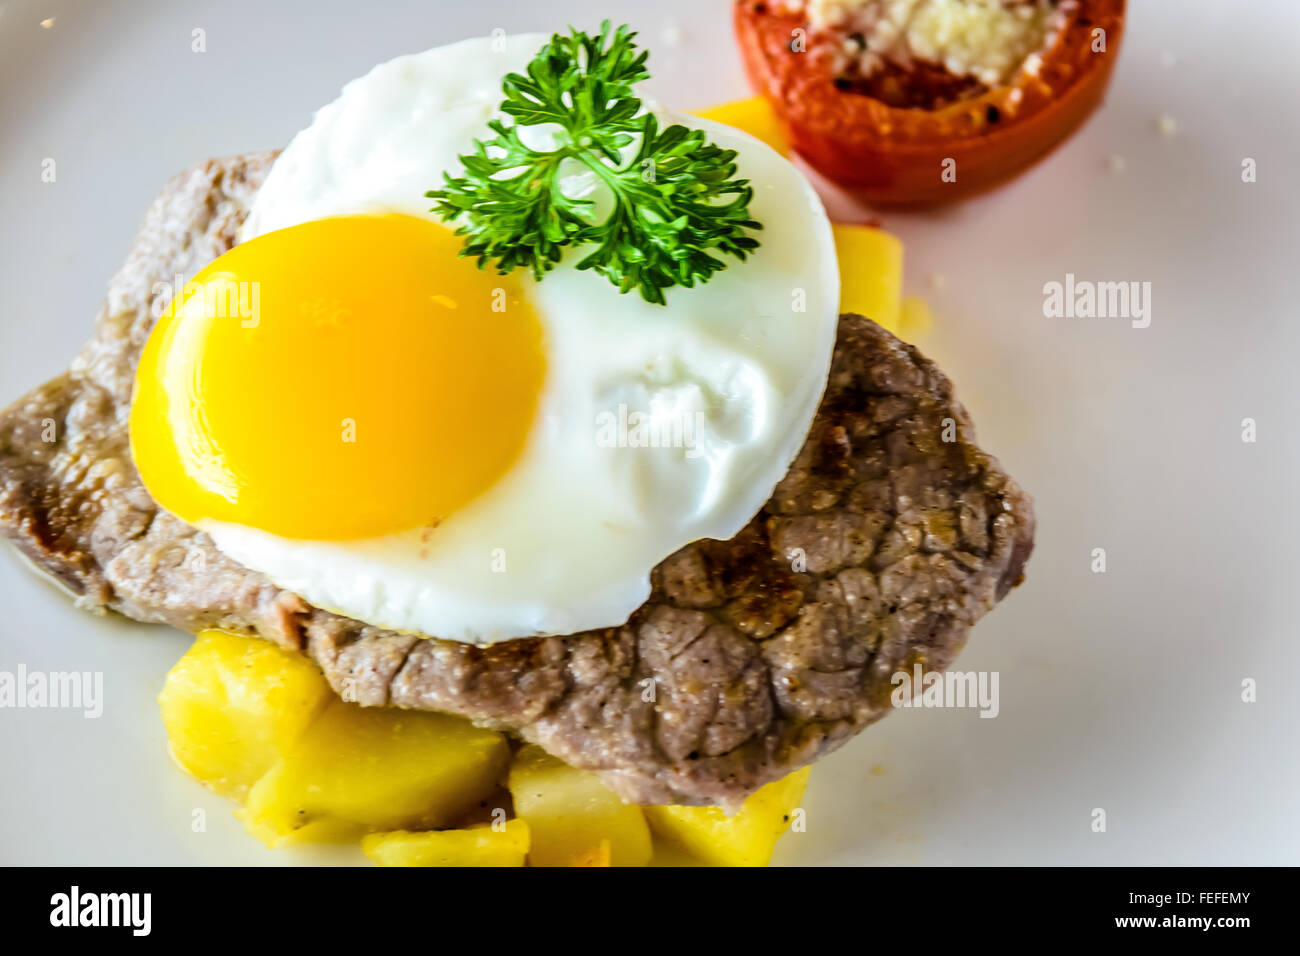 Sirloin steak topped with fried egg and breakfast potatoes Stock Photo